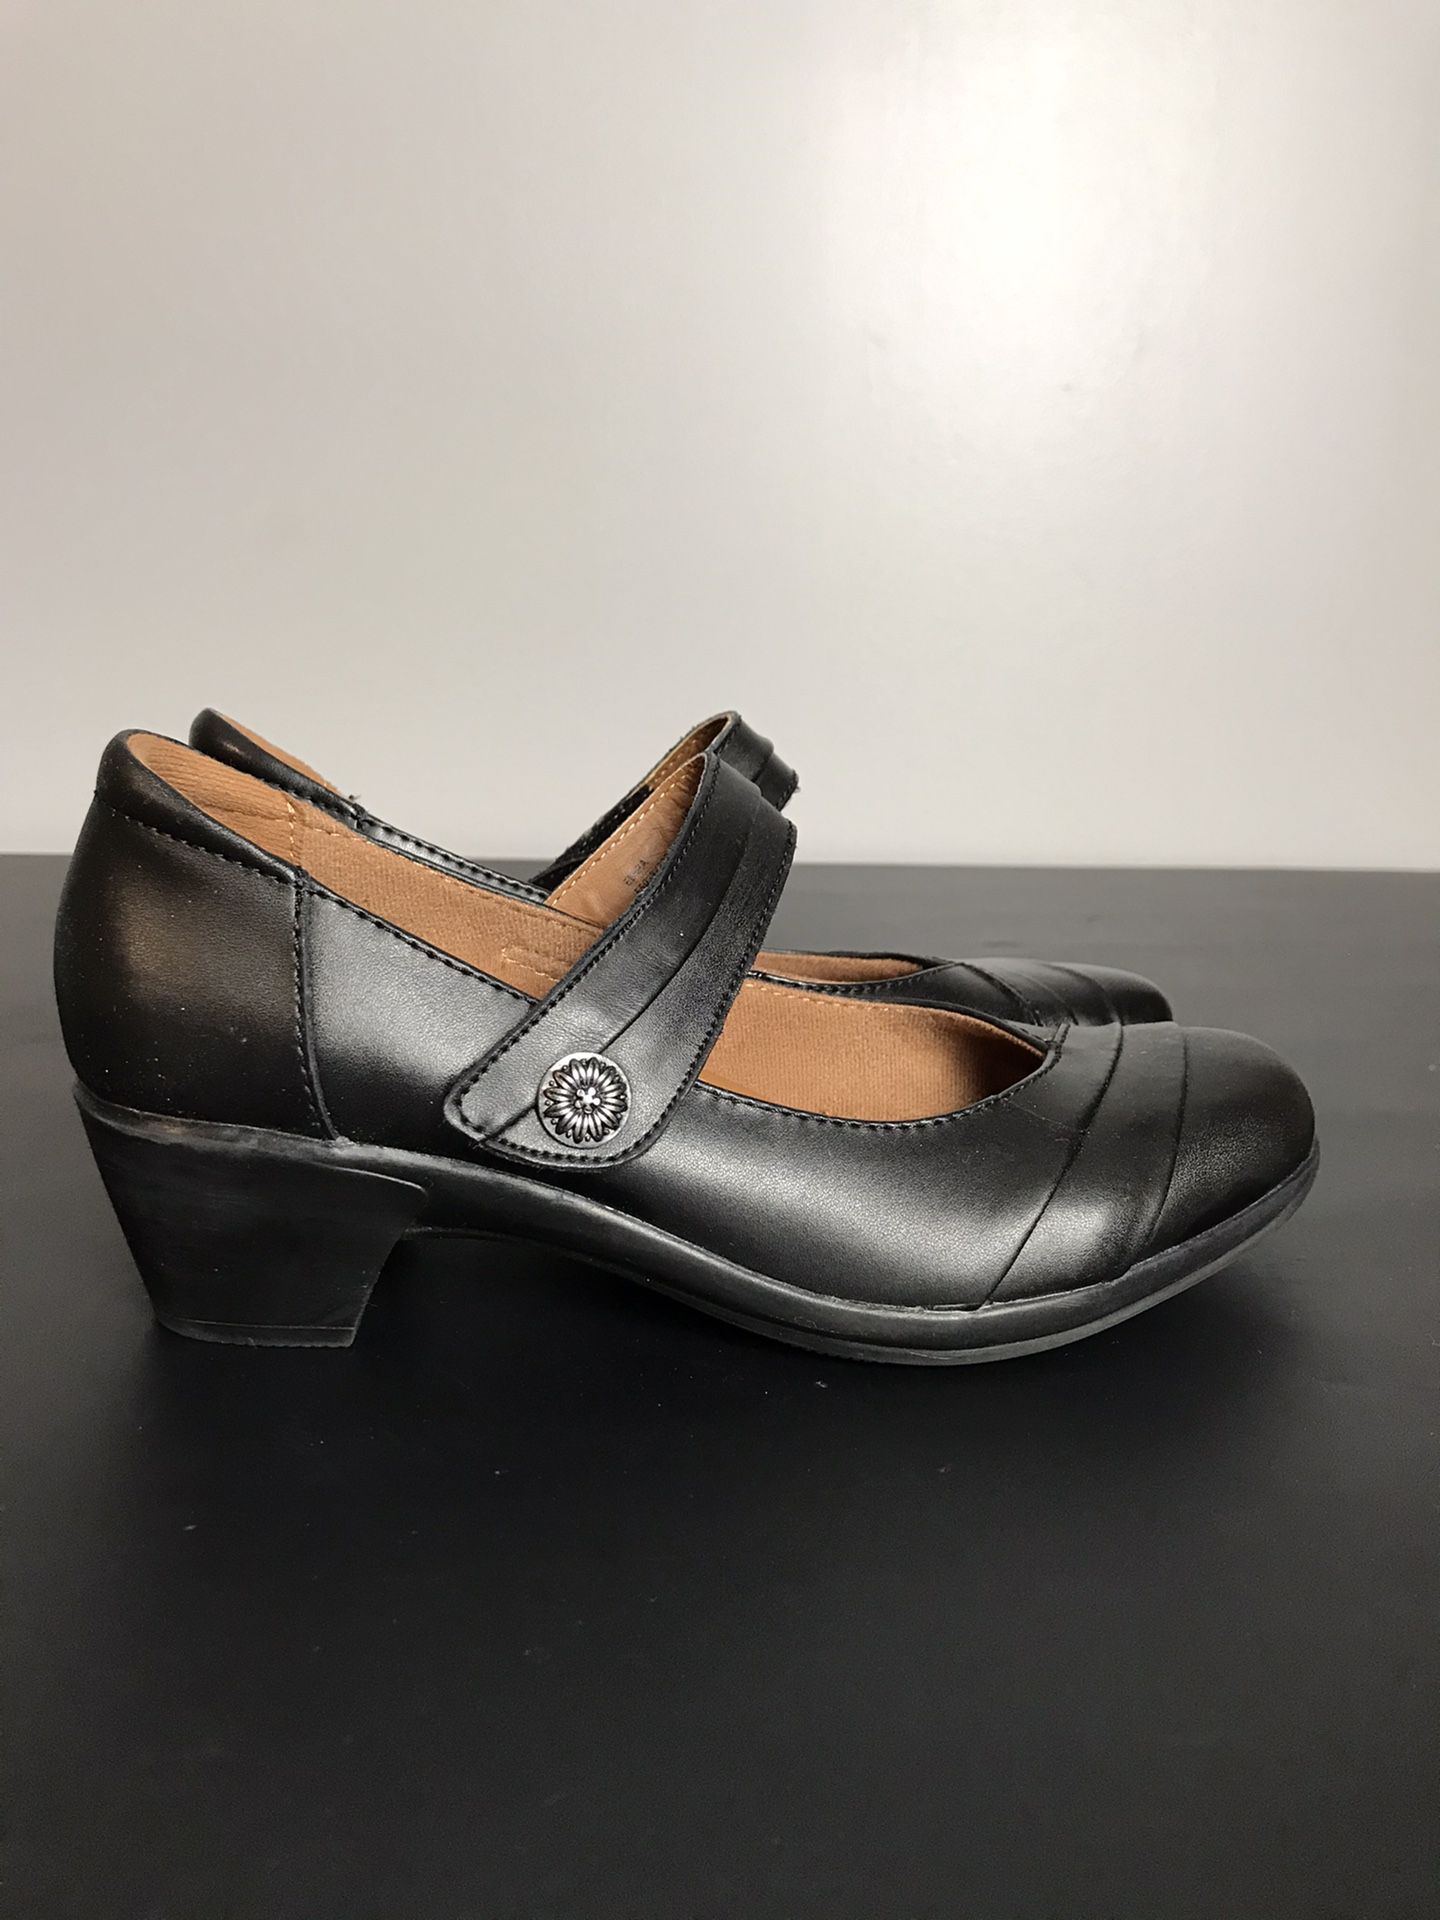 Earth Spirit Classic Clara Mary Jane Leather Block Heels Black Women's Size 8.5 M Pre-Owned Gently used